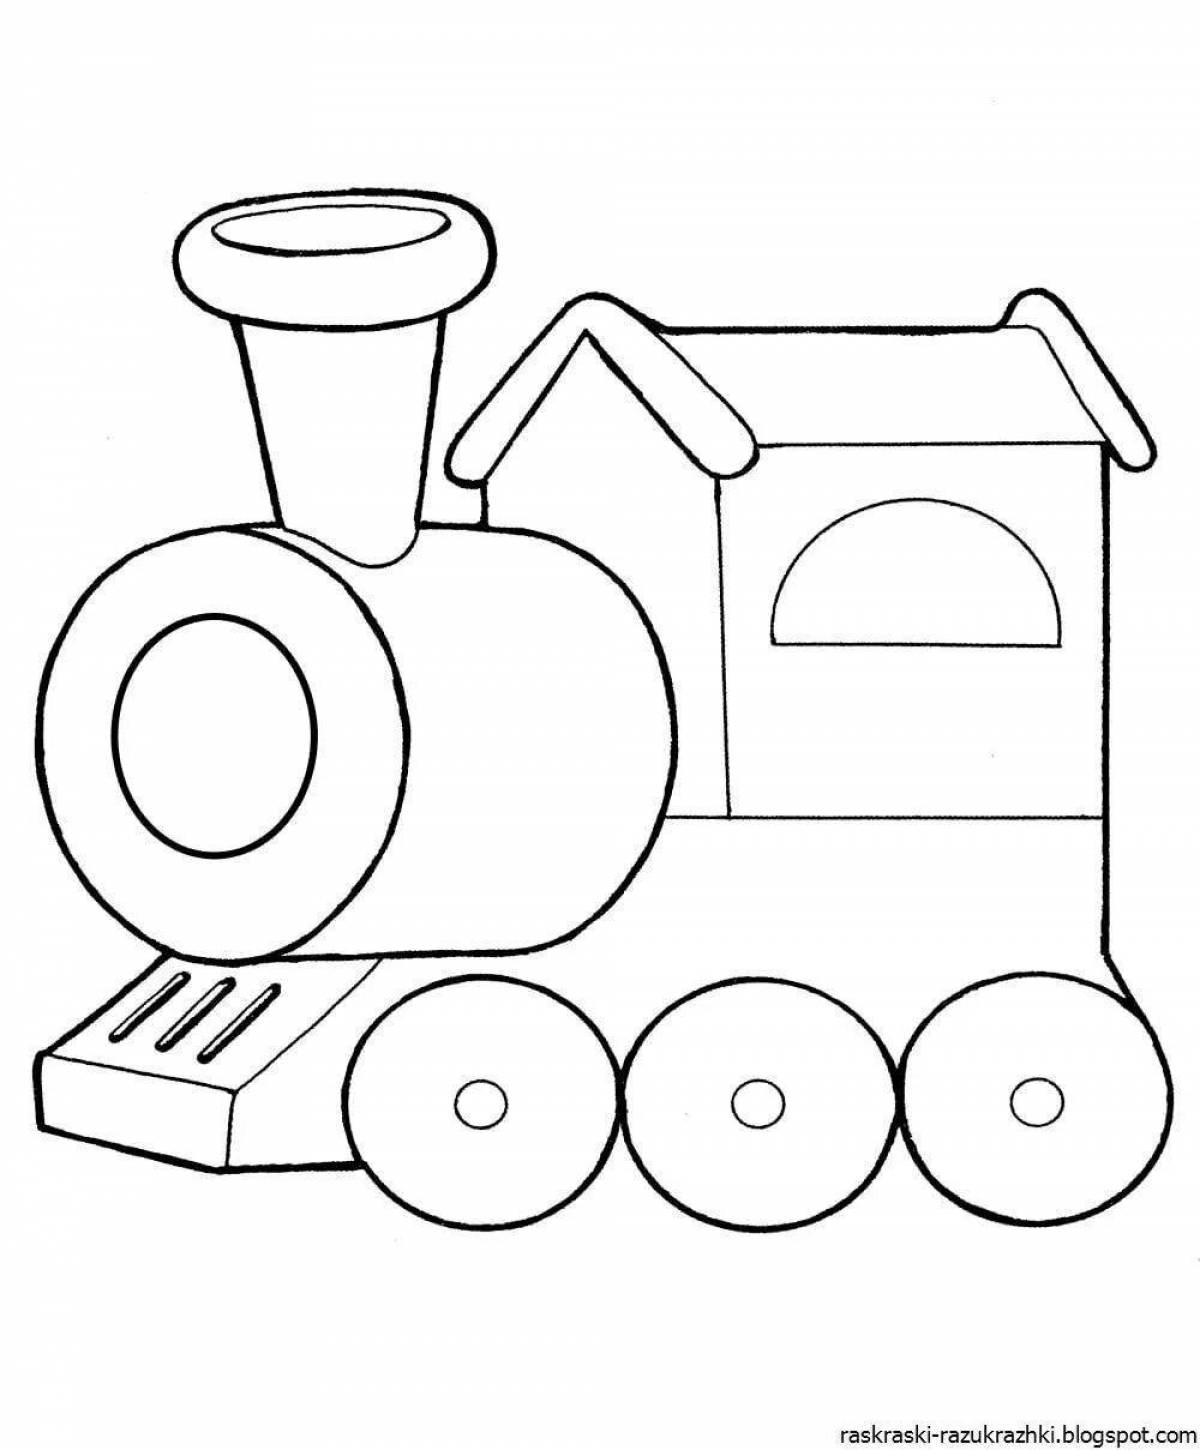 Fun train coloring book for kids 3-4 years old